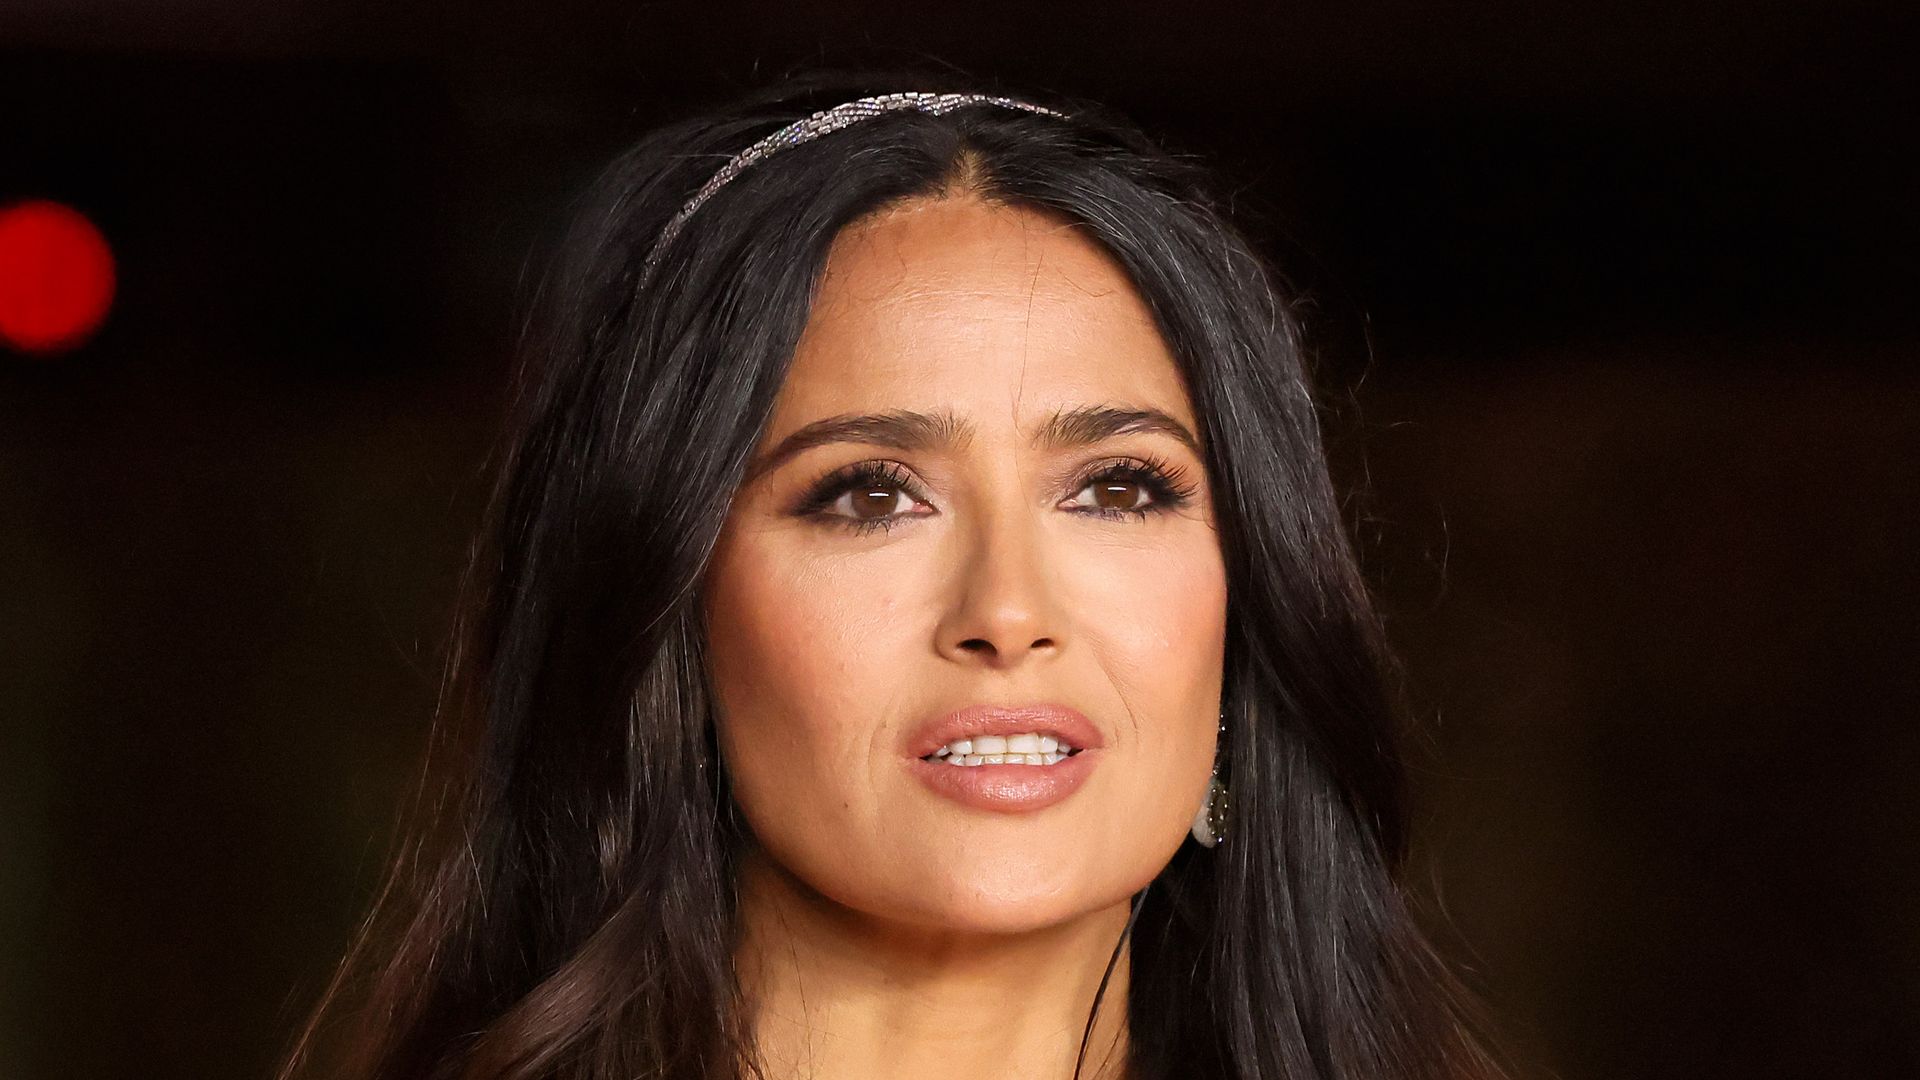 Salma Hayek Pinault attends the 3rd Annual Academy Museum Gala at Academy Museum of Motion Pictures on December 03, 2023 in Los Angeles, California